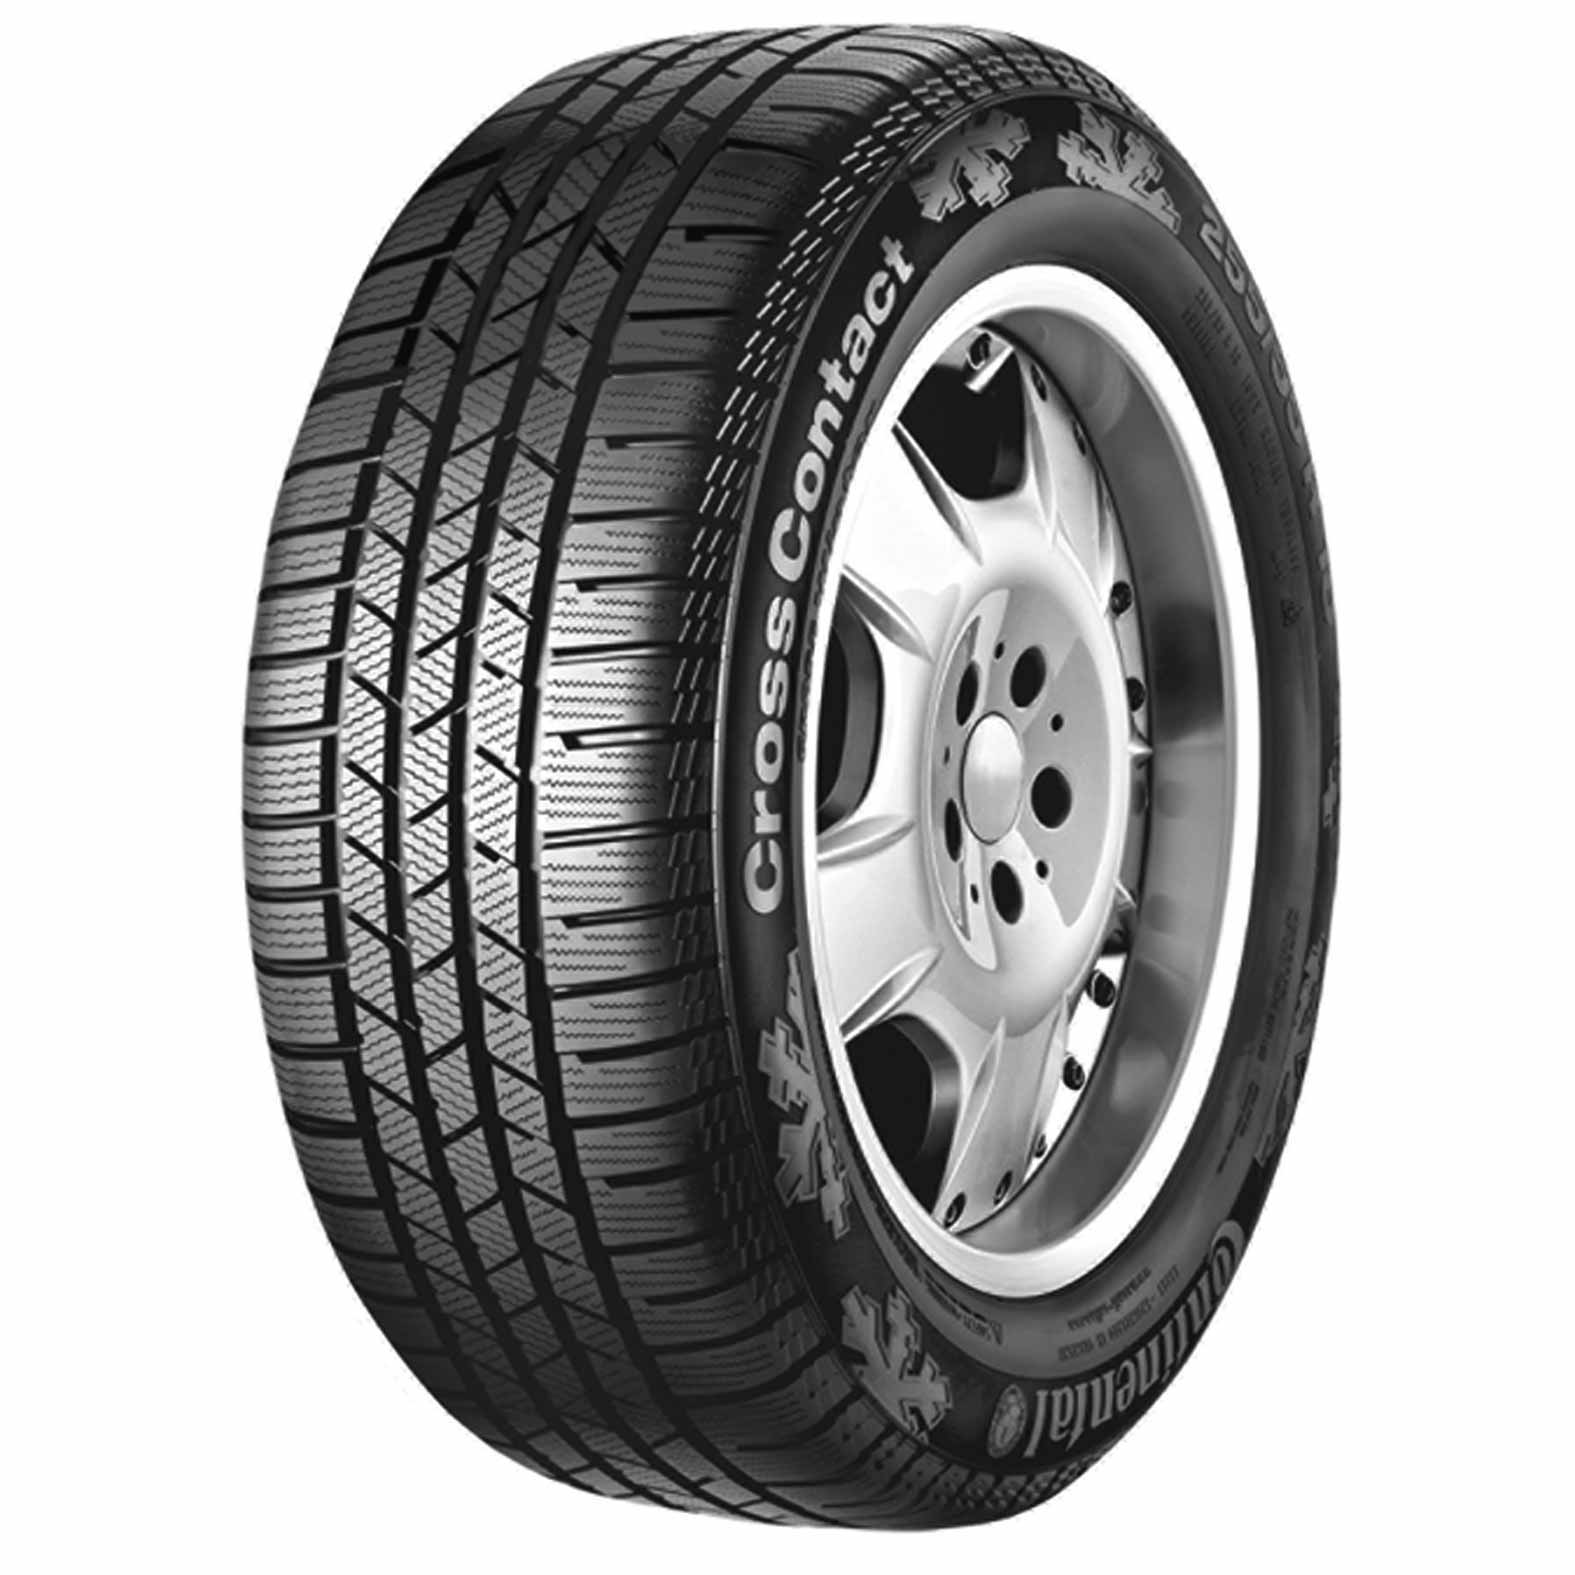 Continental ContiCrossContact Winter | Kal Tires Winter for Tire